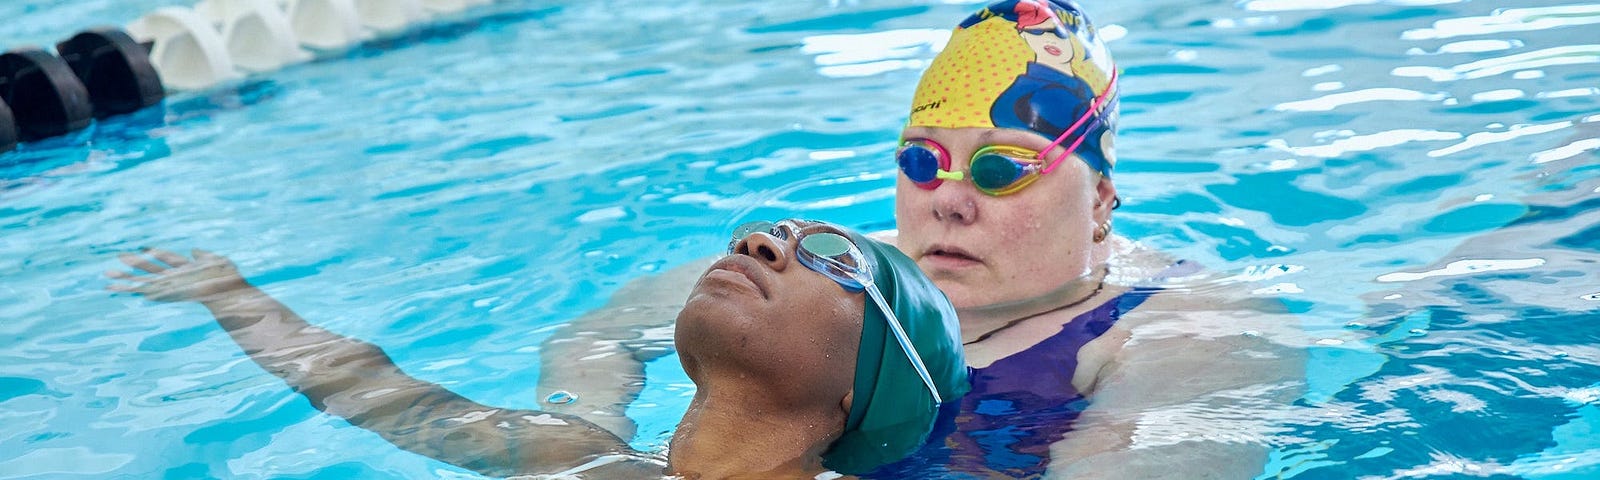 Aaricka Washington being supported in a pool by a swim instructor.